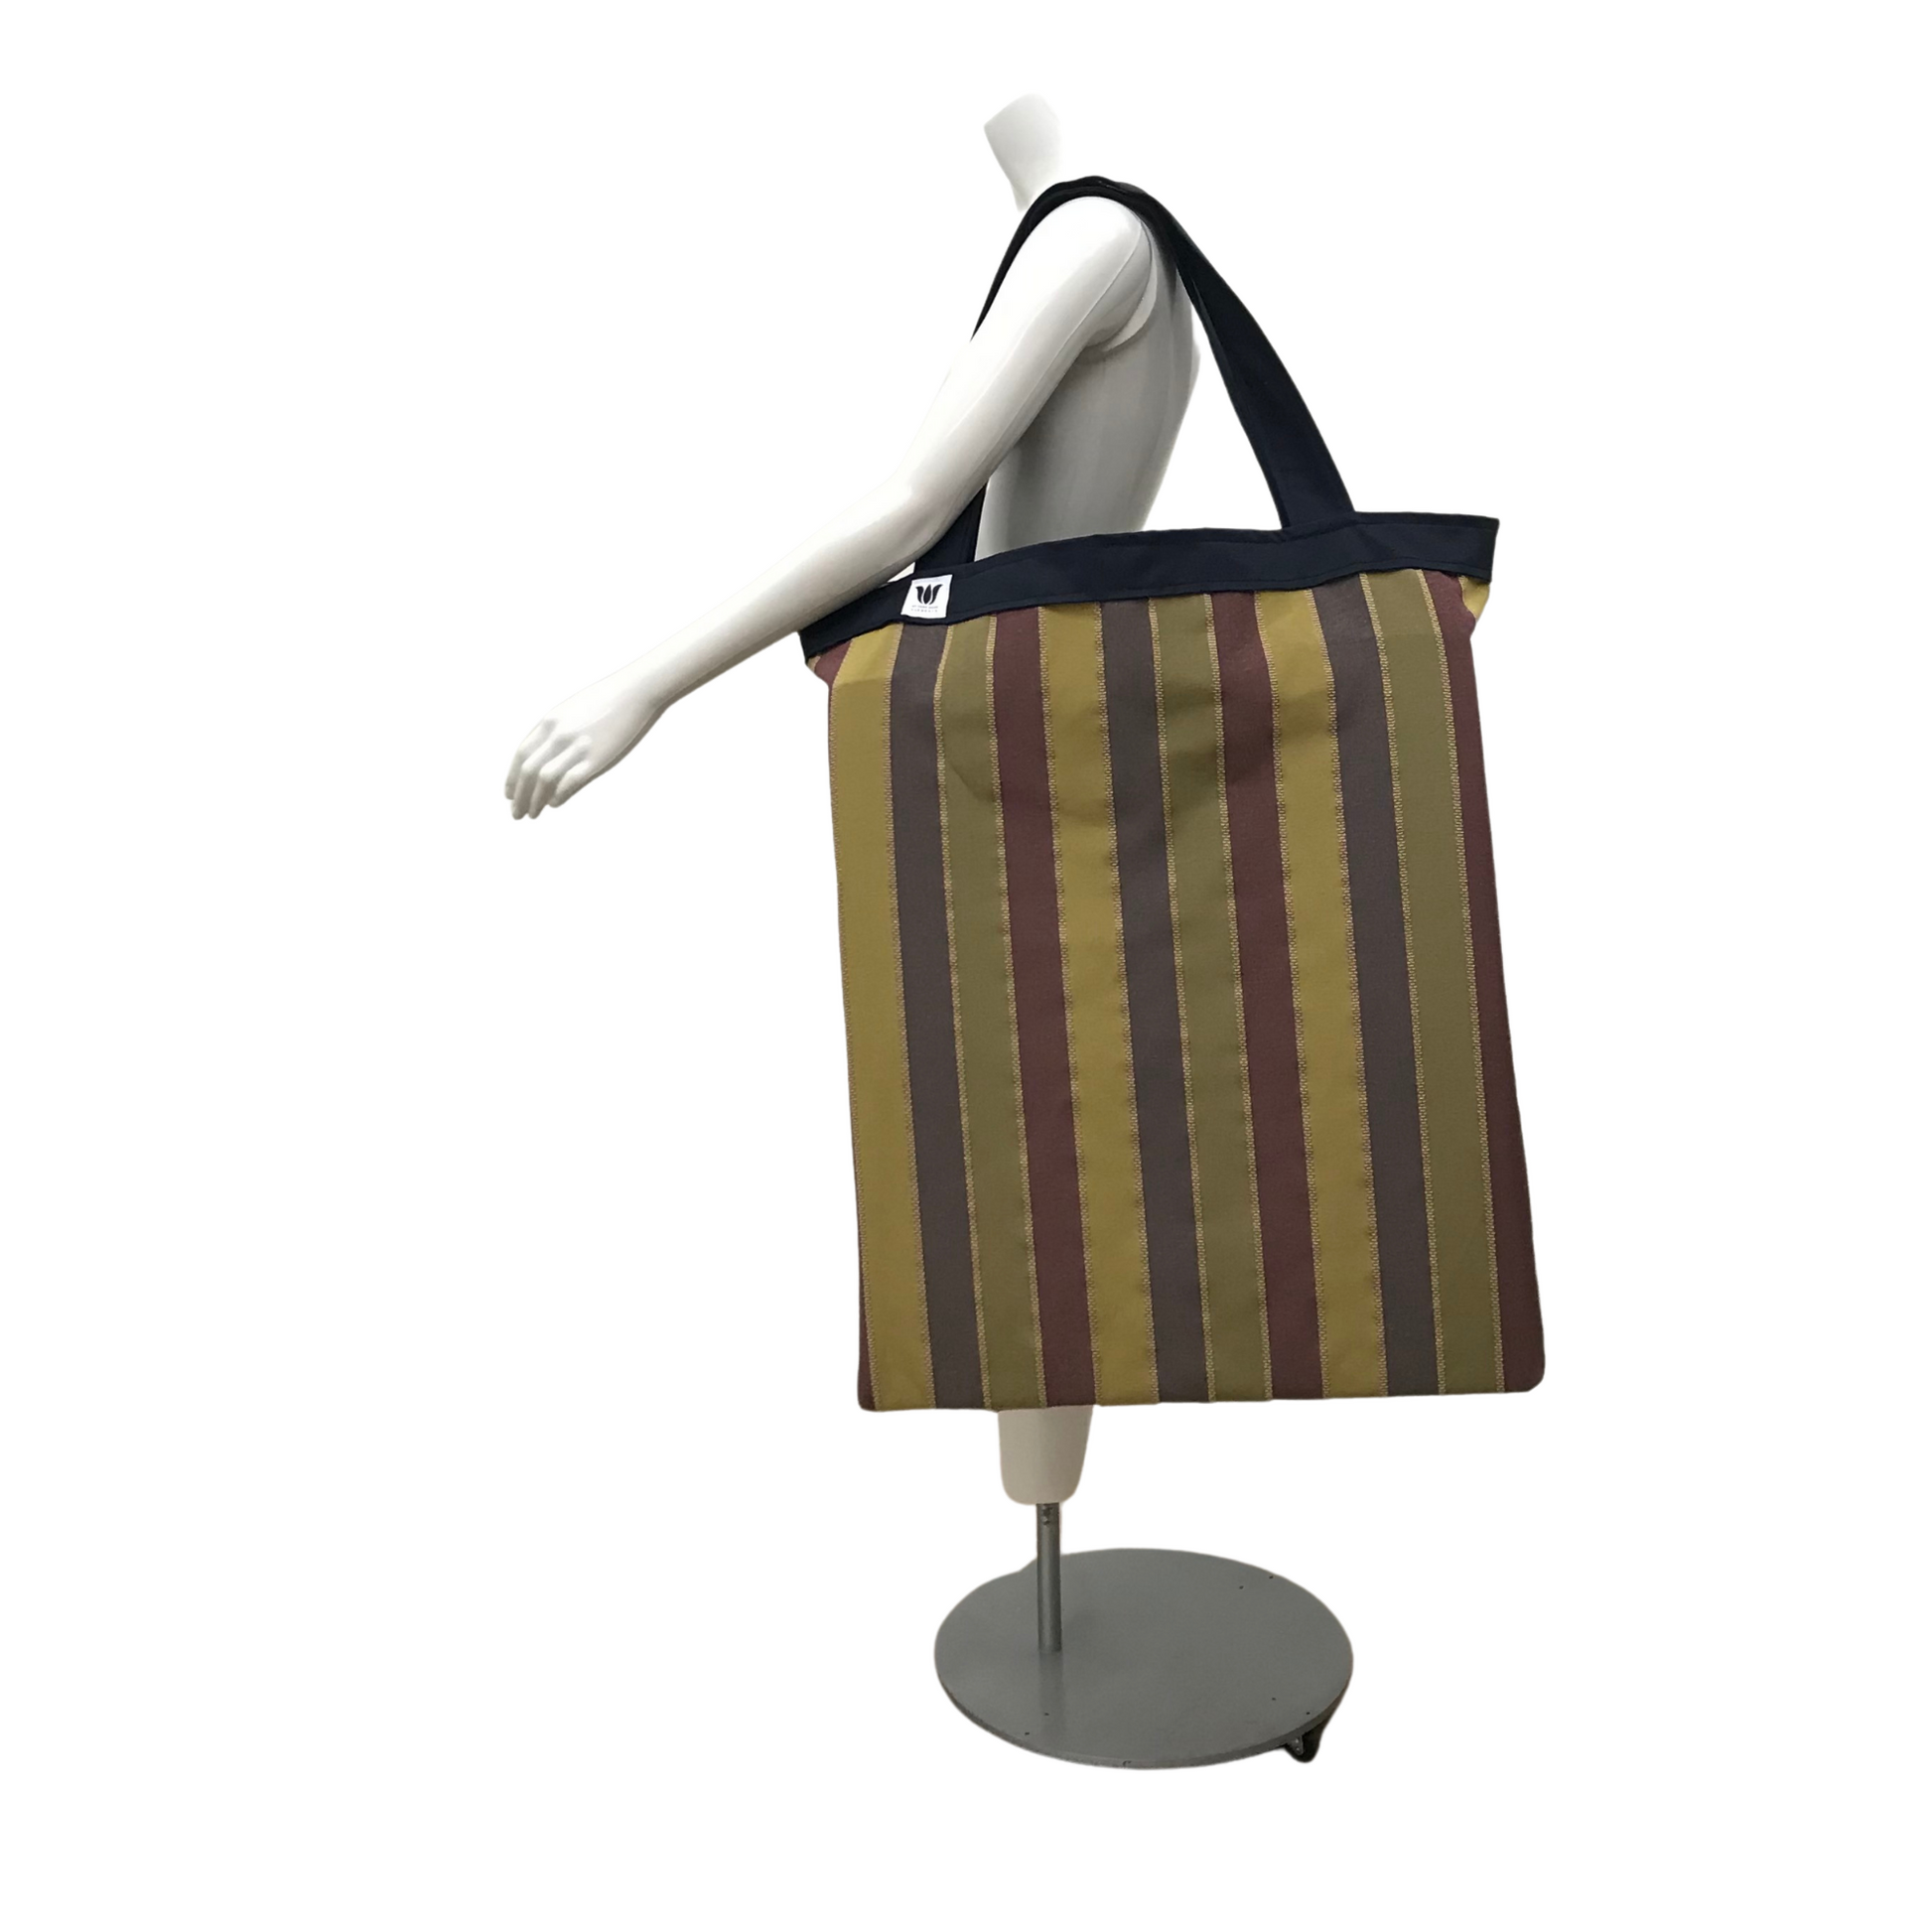 Extra Large Yoga Tote Bag in cotton canvas striped fabric to carry and or store yoga props for yoga practice. Made in Canada by My Yoga Room Elements